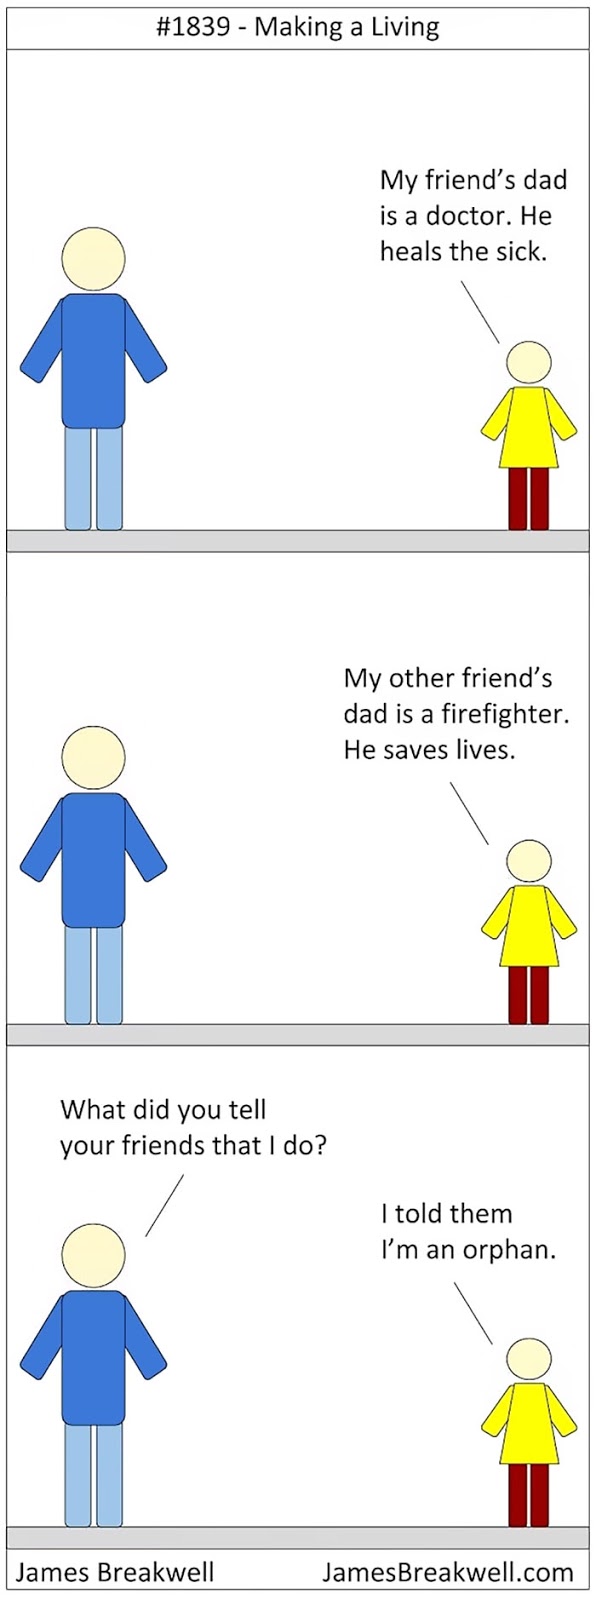 Hilarious Comics Depict The Life Of A Dad Of Four Daughters